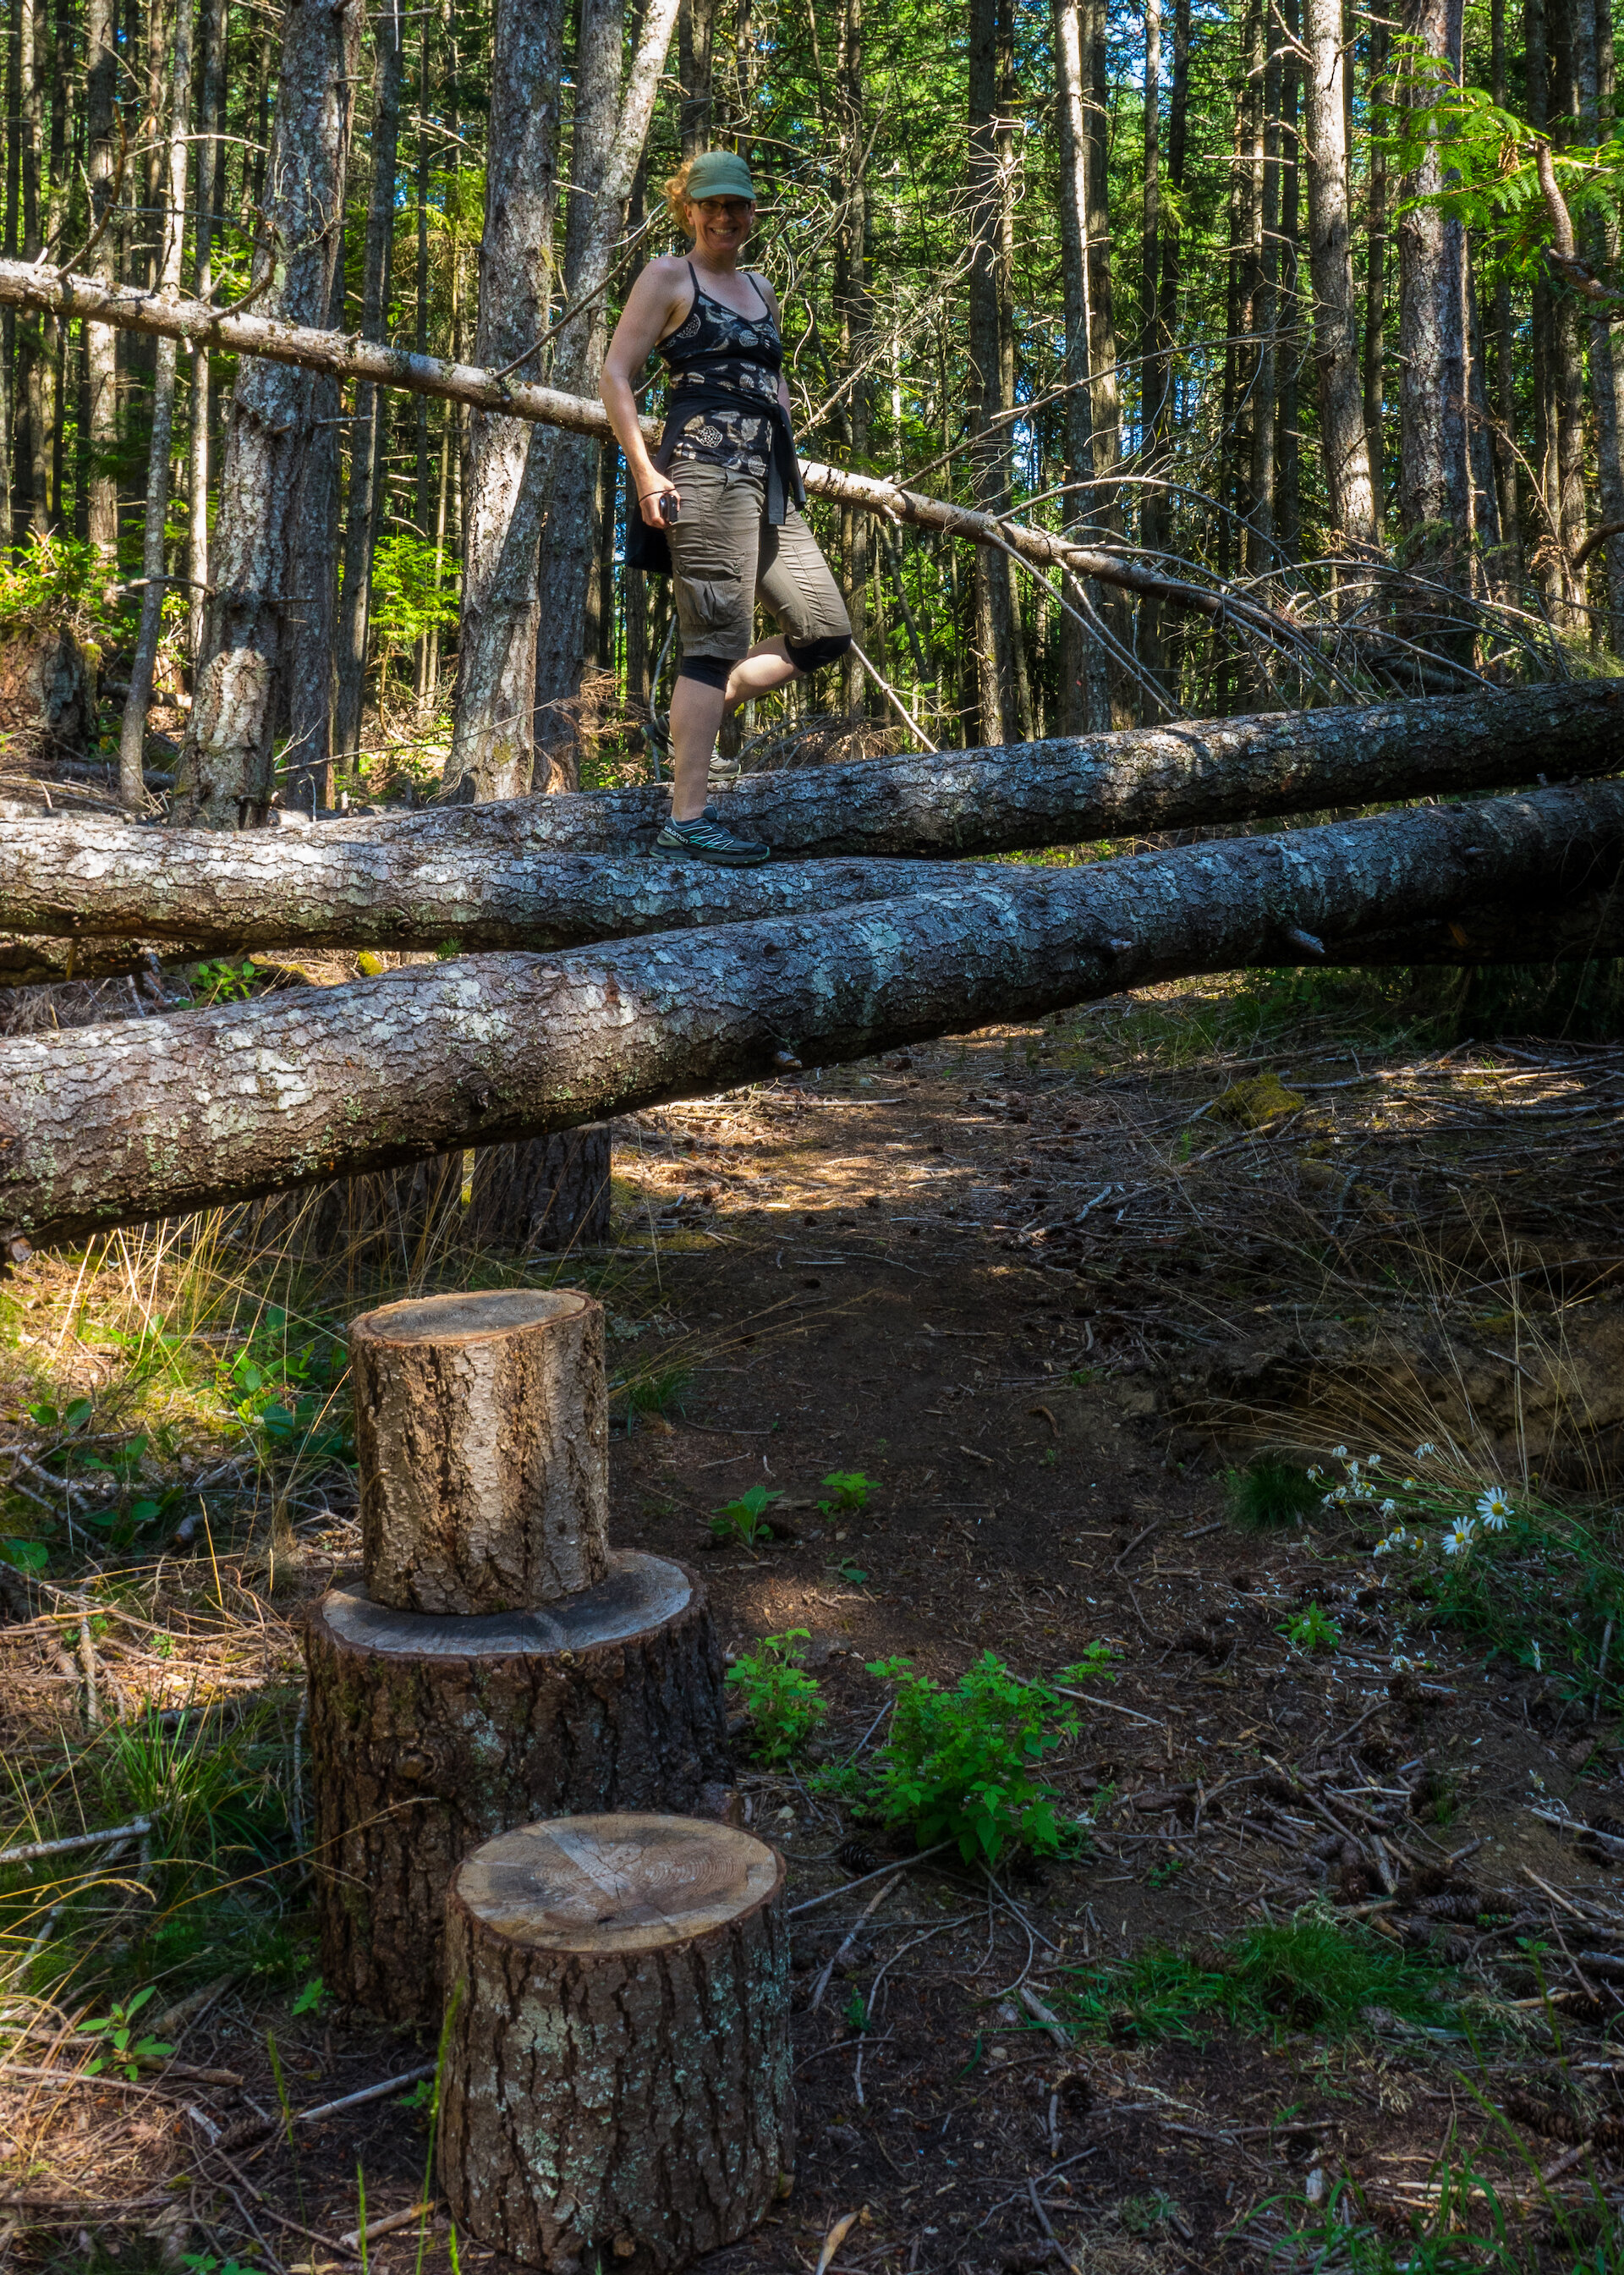  Some fun ways over the downed trees. 